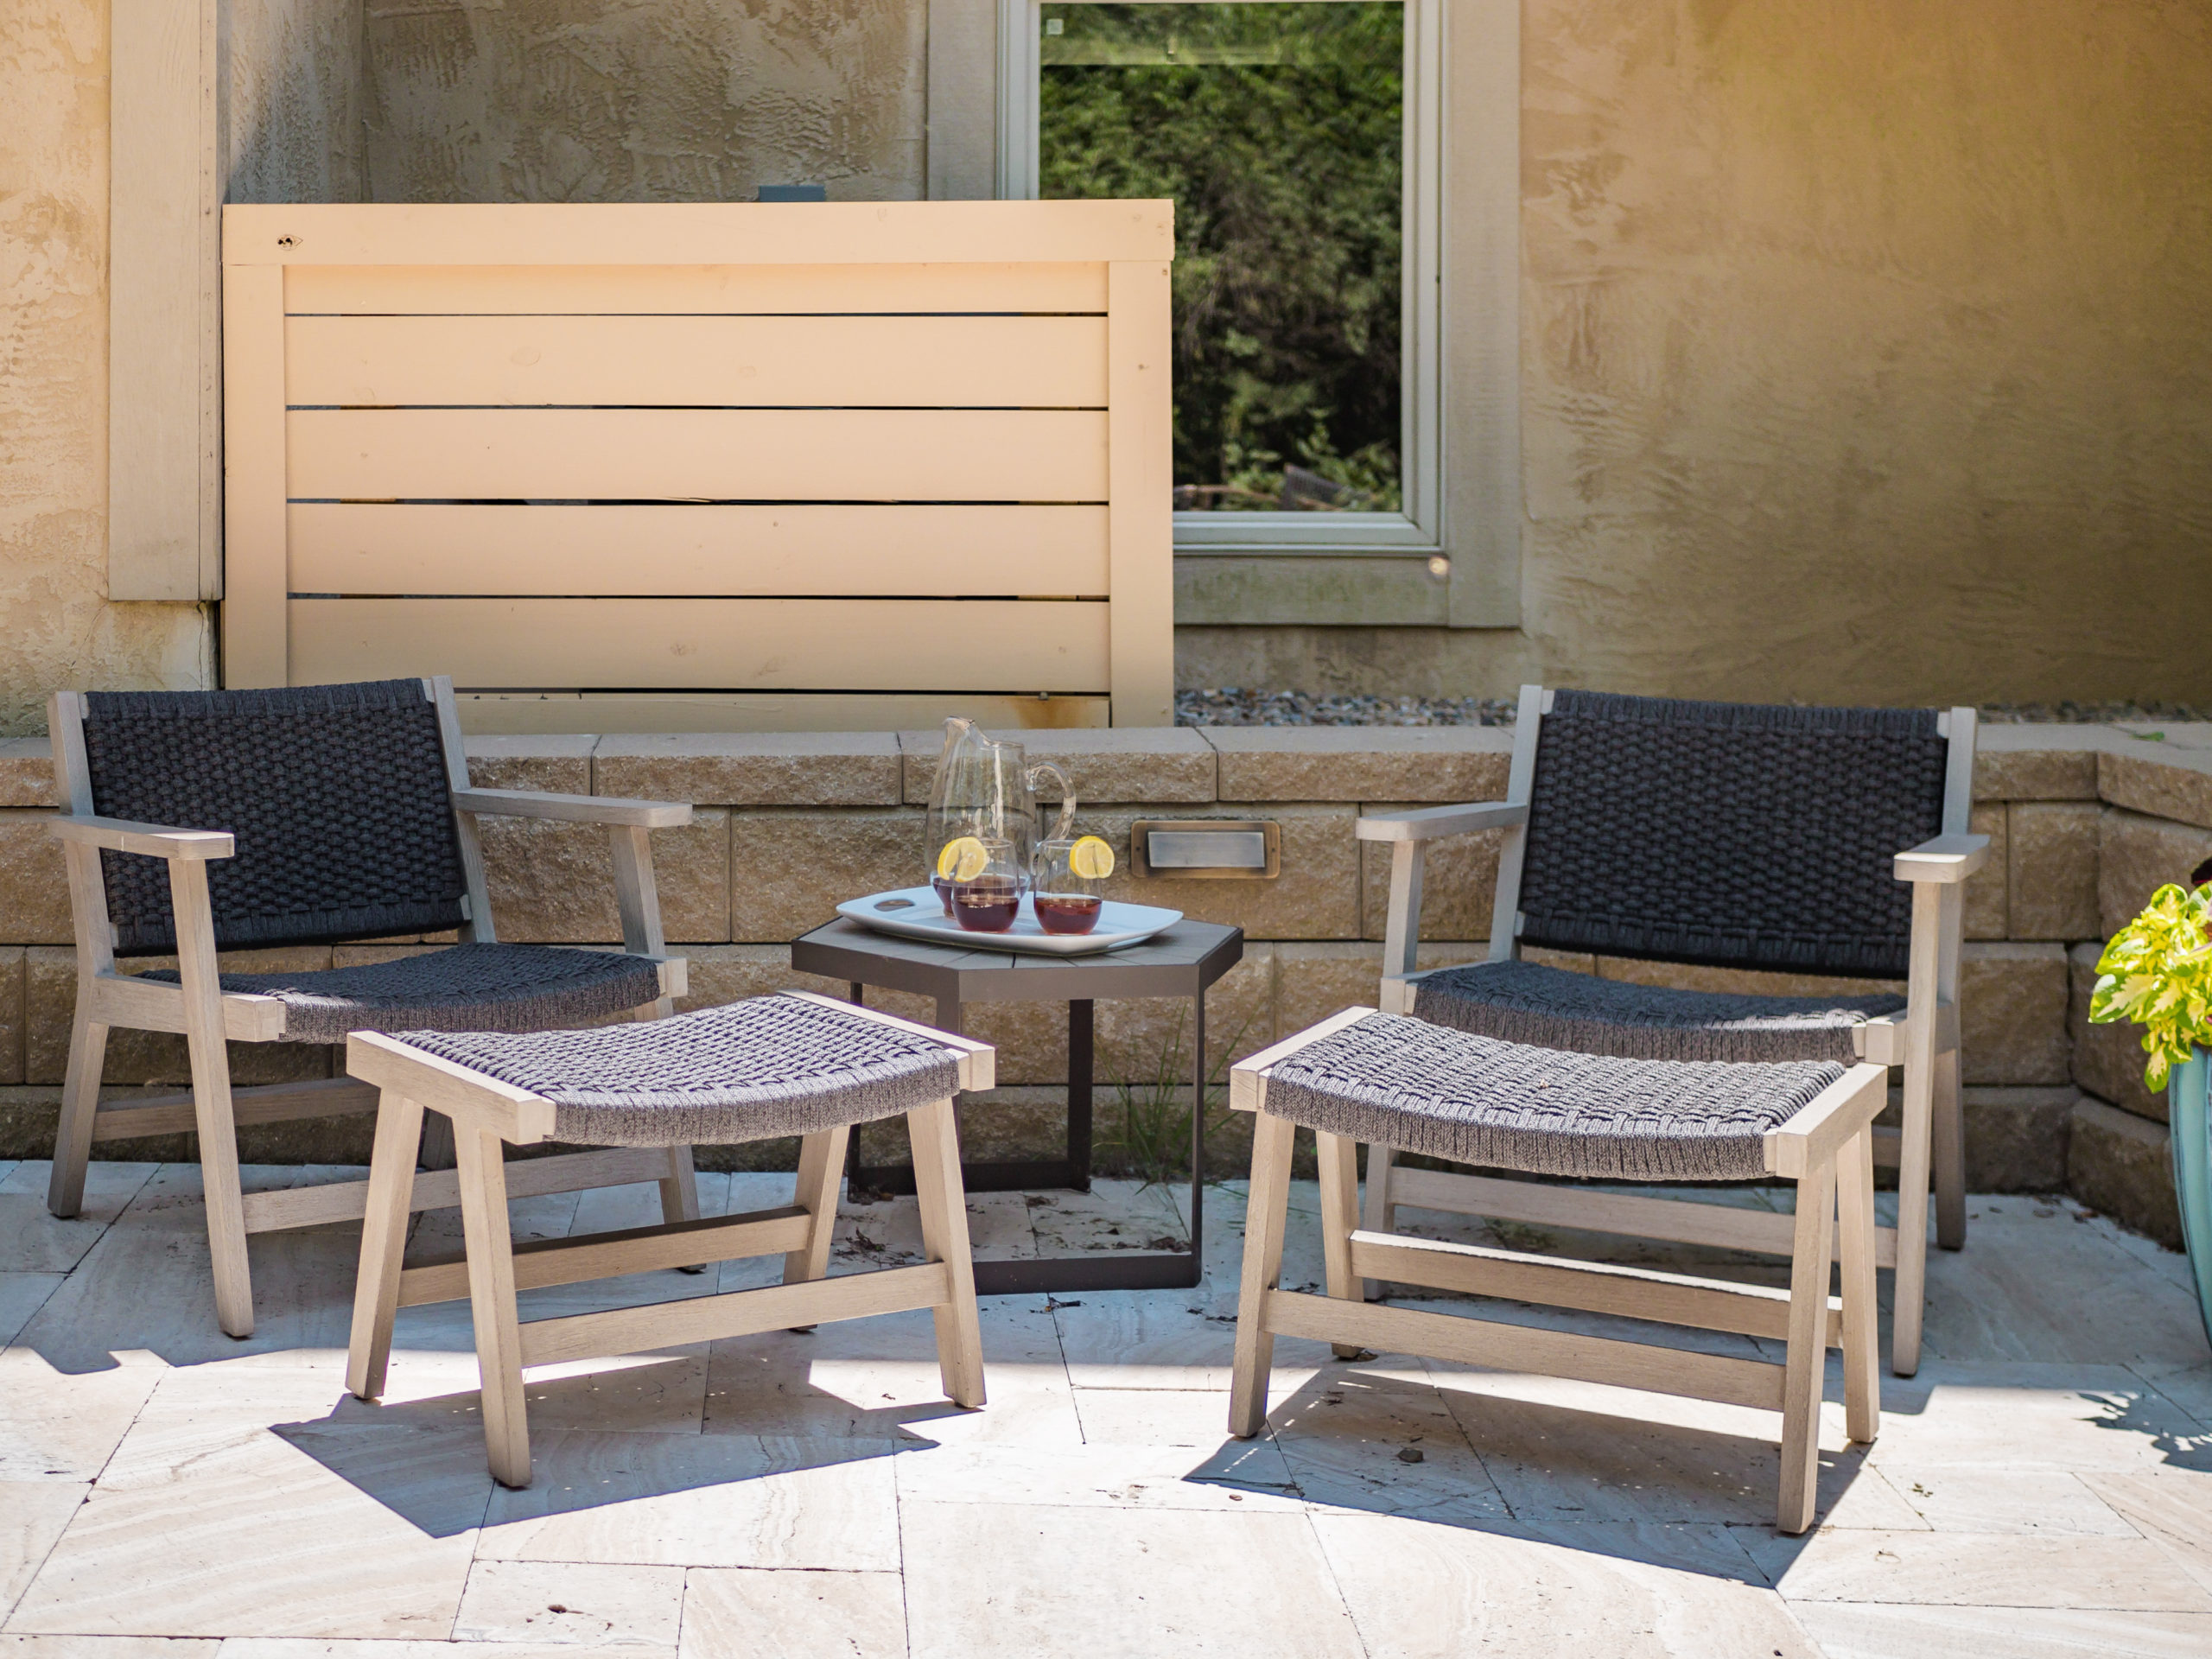 Modern outdoor patio seating with chairs, ottomans, and table